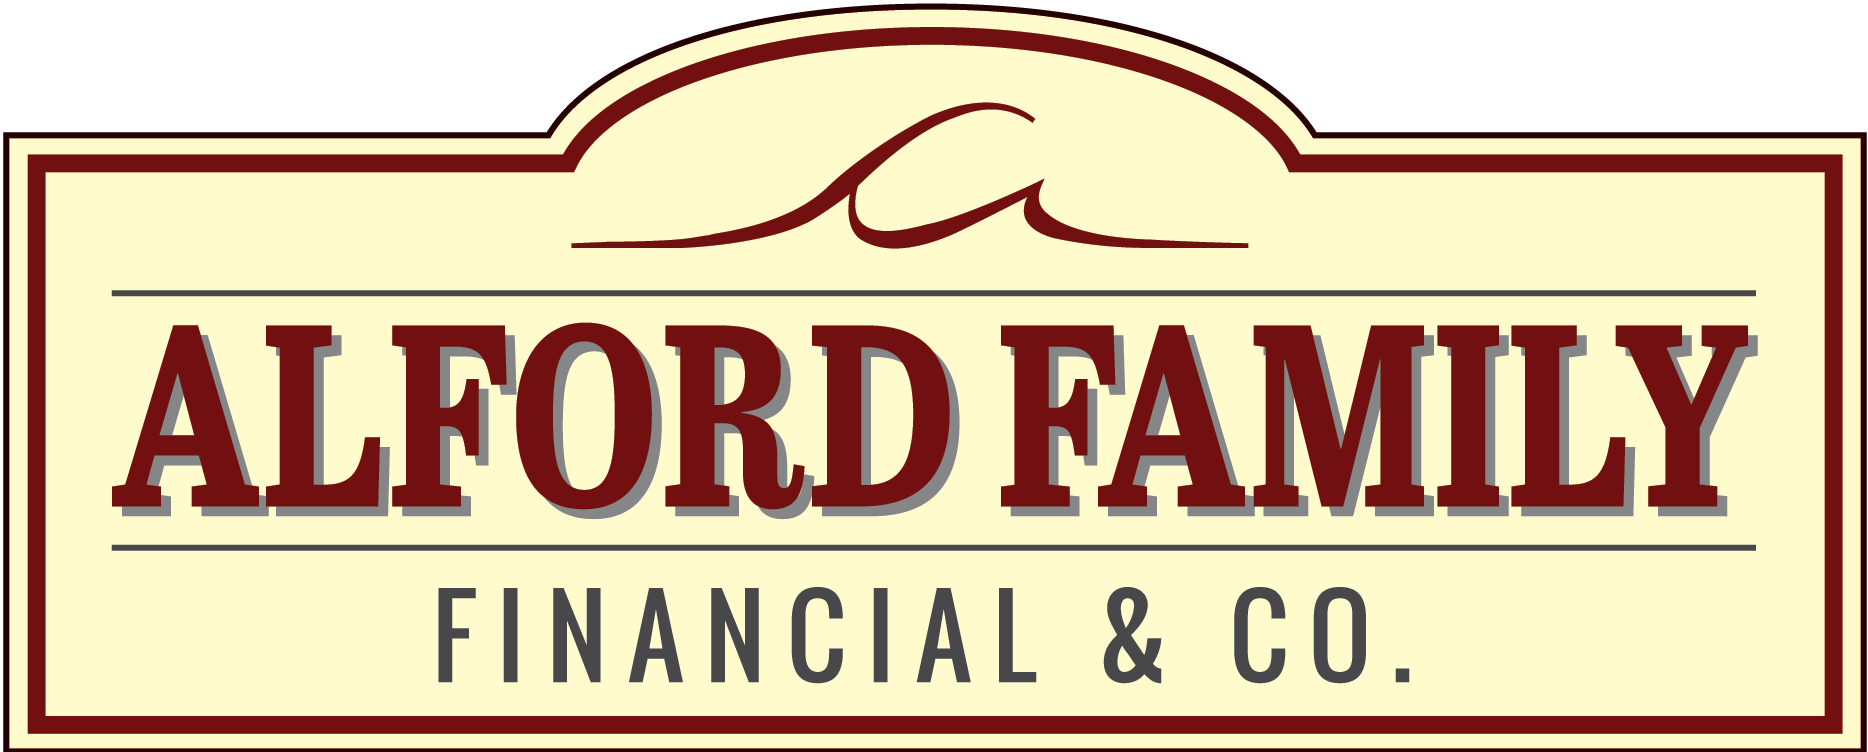 ALFORD FAMILY FINANCIAL & CO.